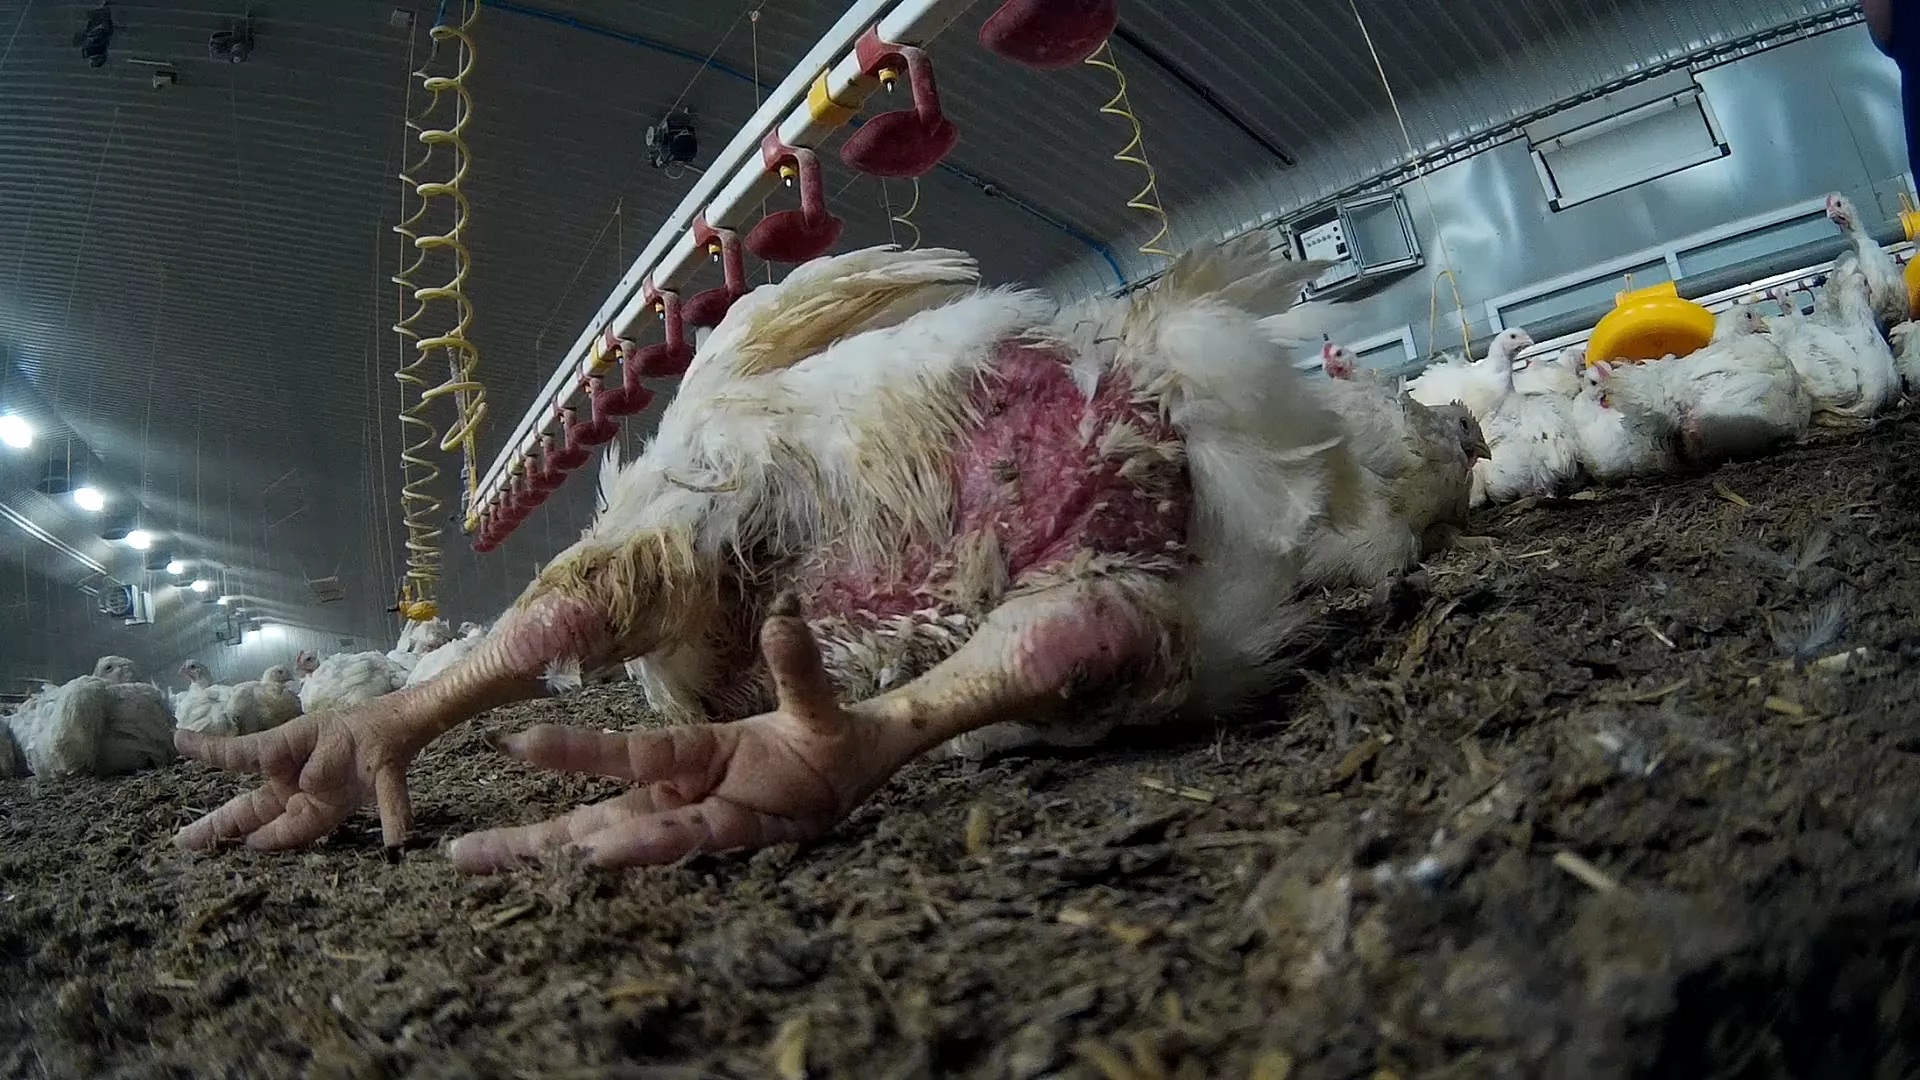 A chicken with feather loss and burns, bred for meat in a factory farm